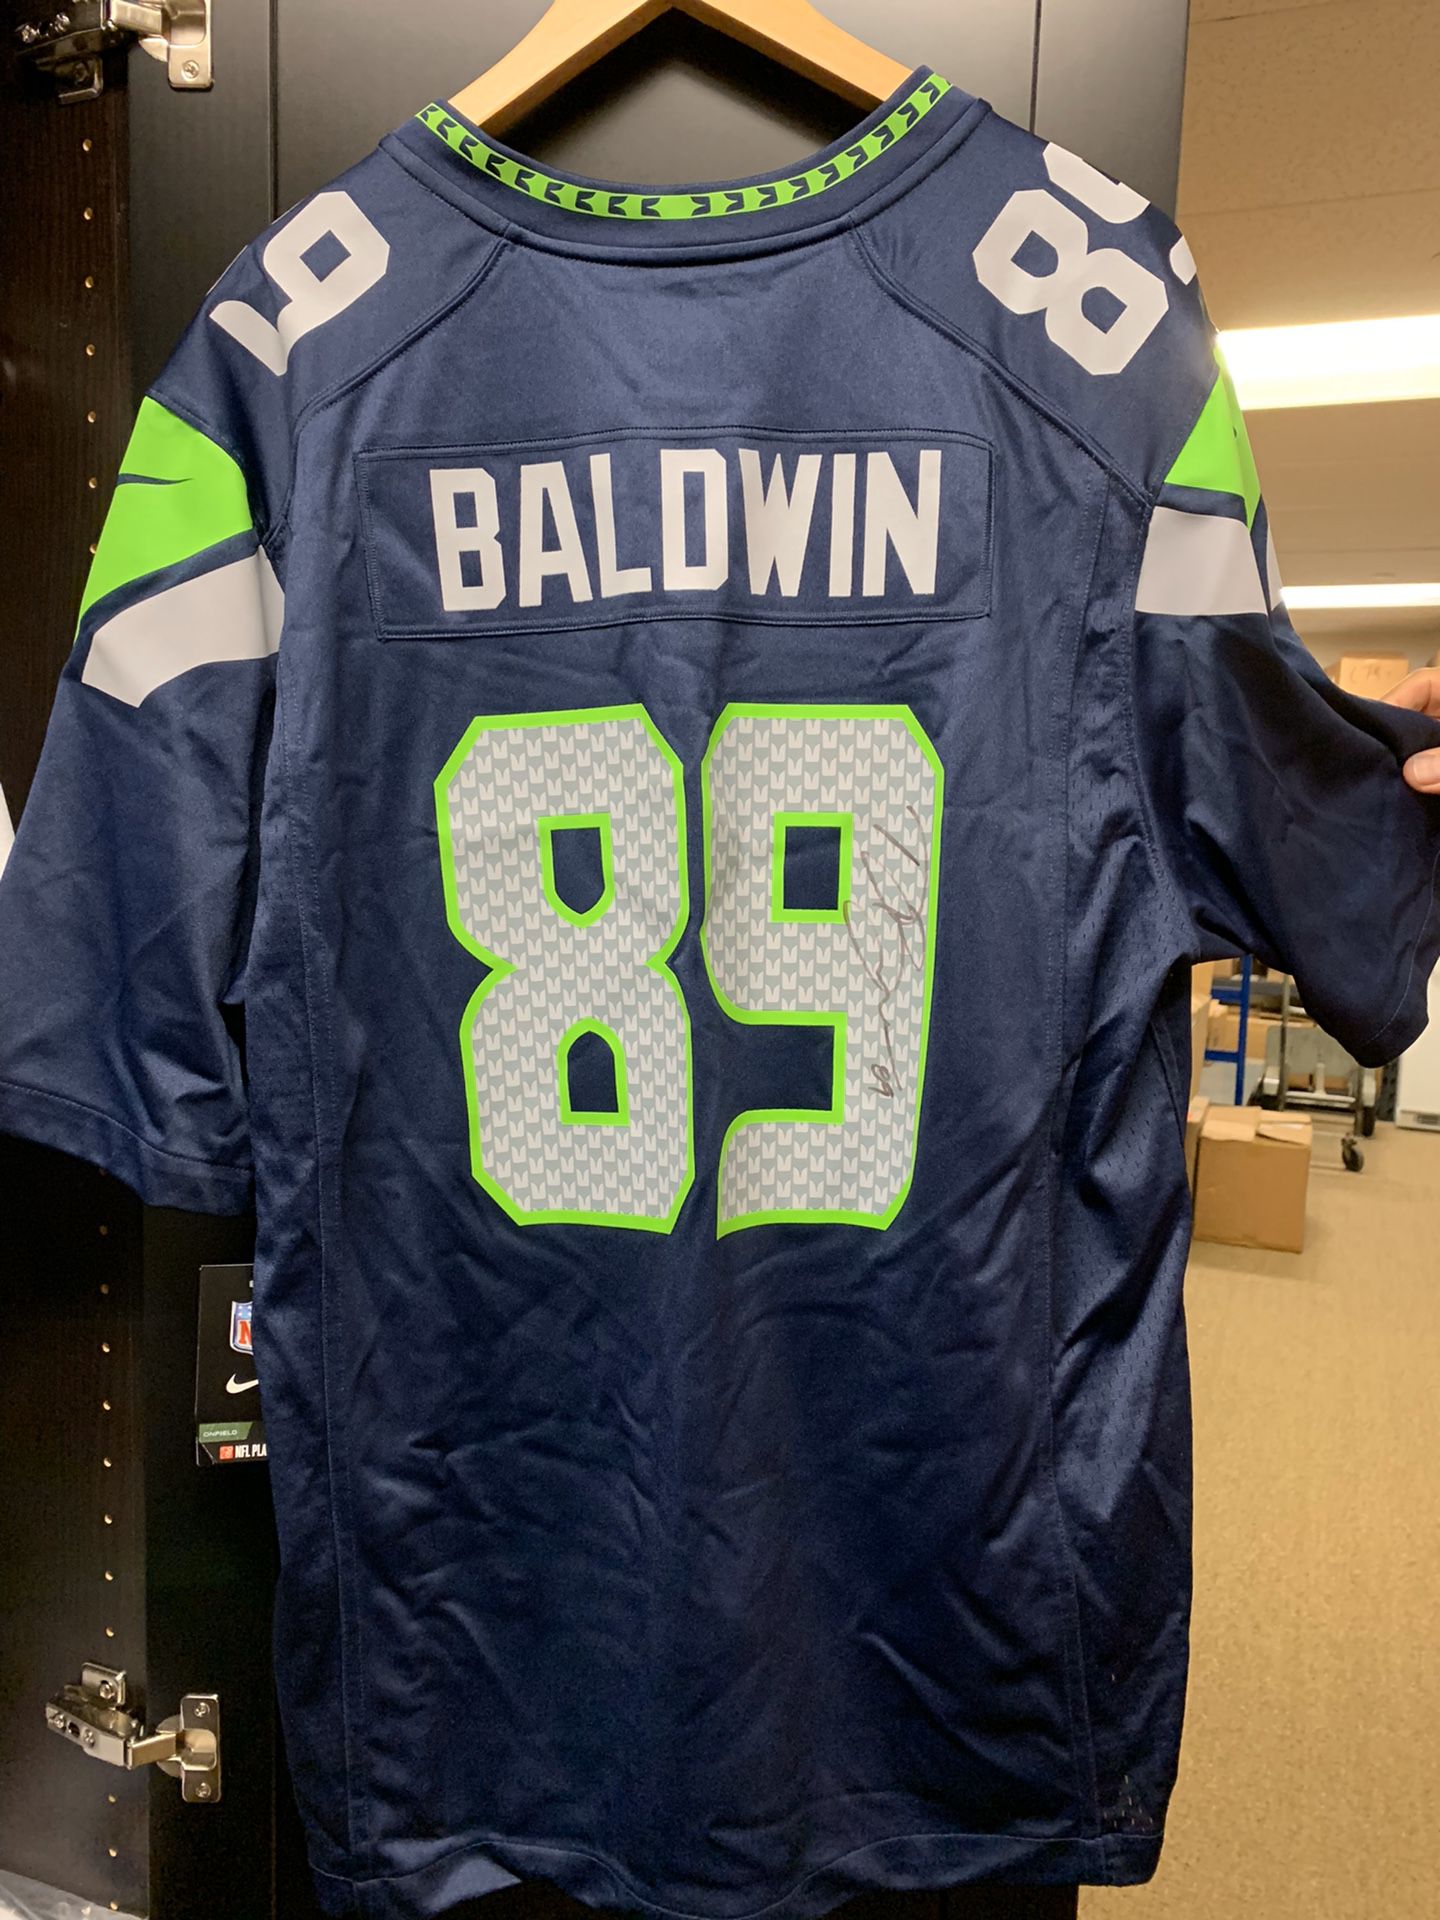 Signed Doug Baldwin Seahawks Jersey for Sale in East Liberty, PA - OfferUp